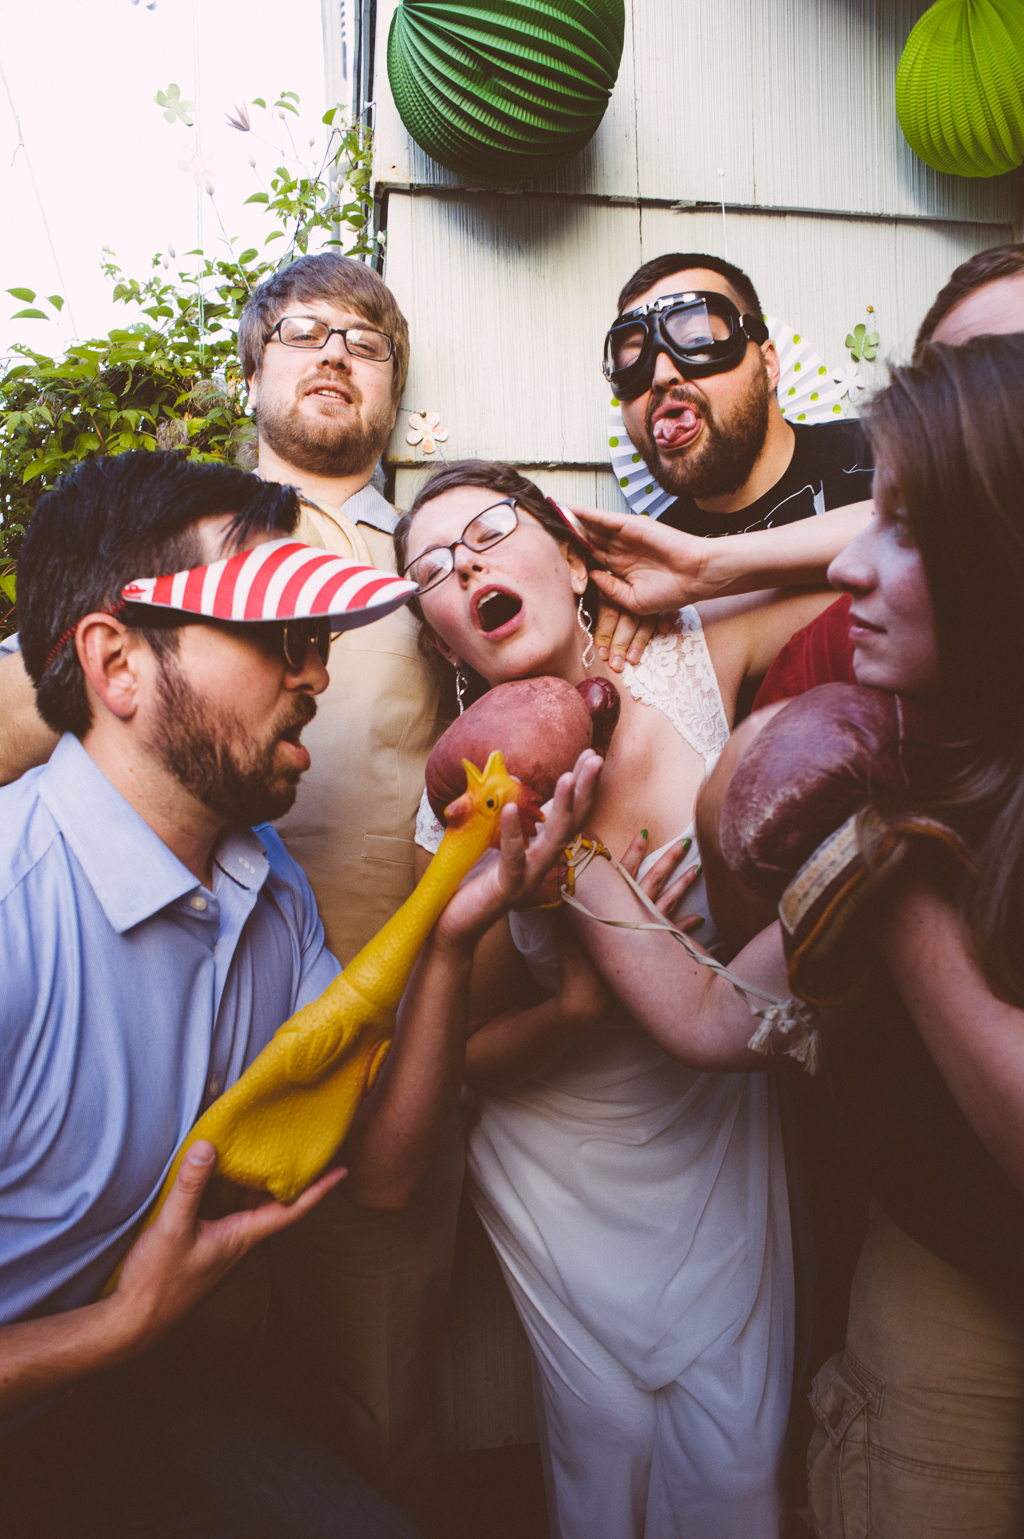 wedding guests get silly with a rubber chicken in a photo booth with the bride